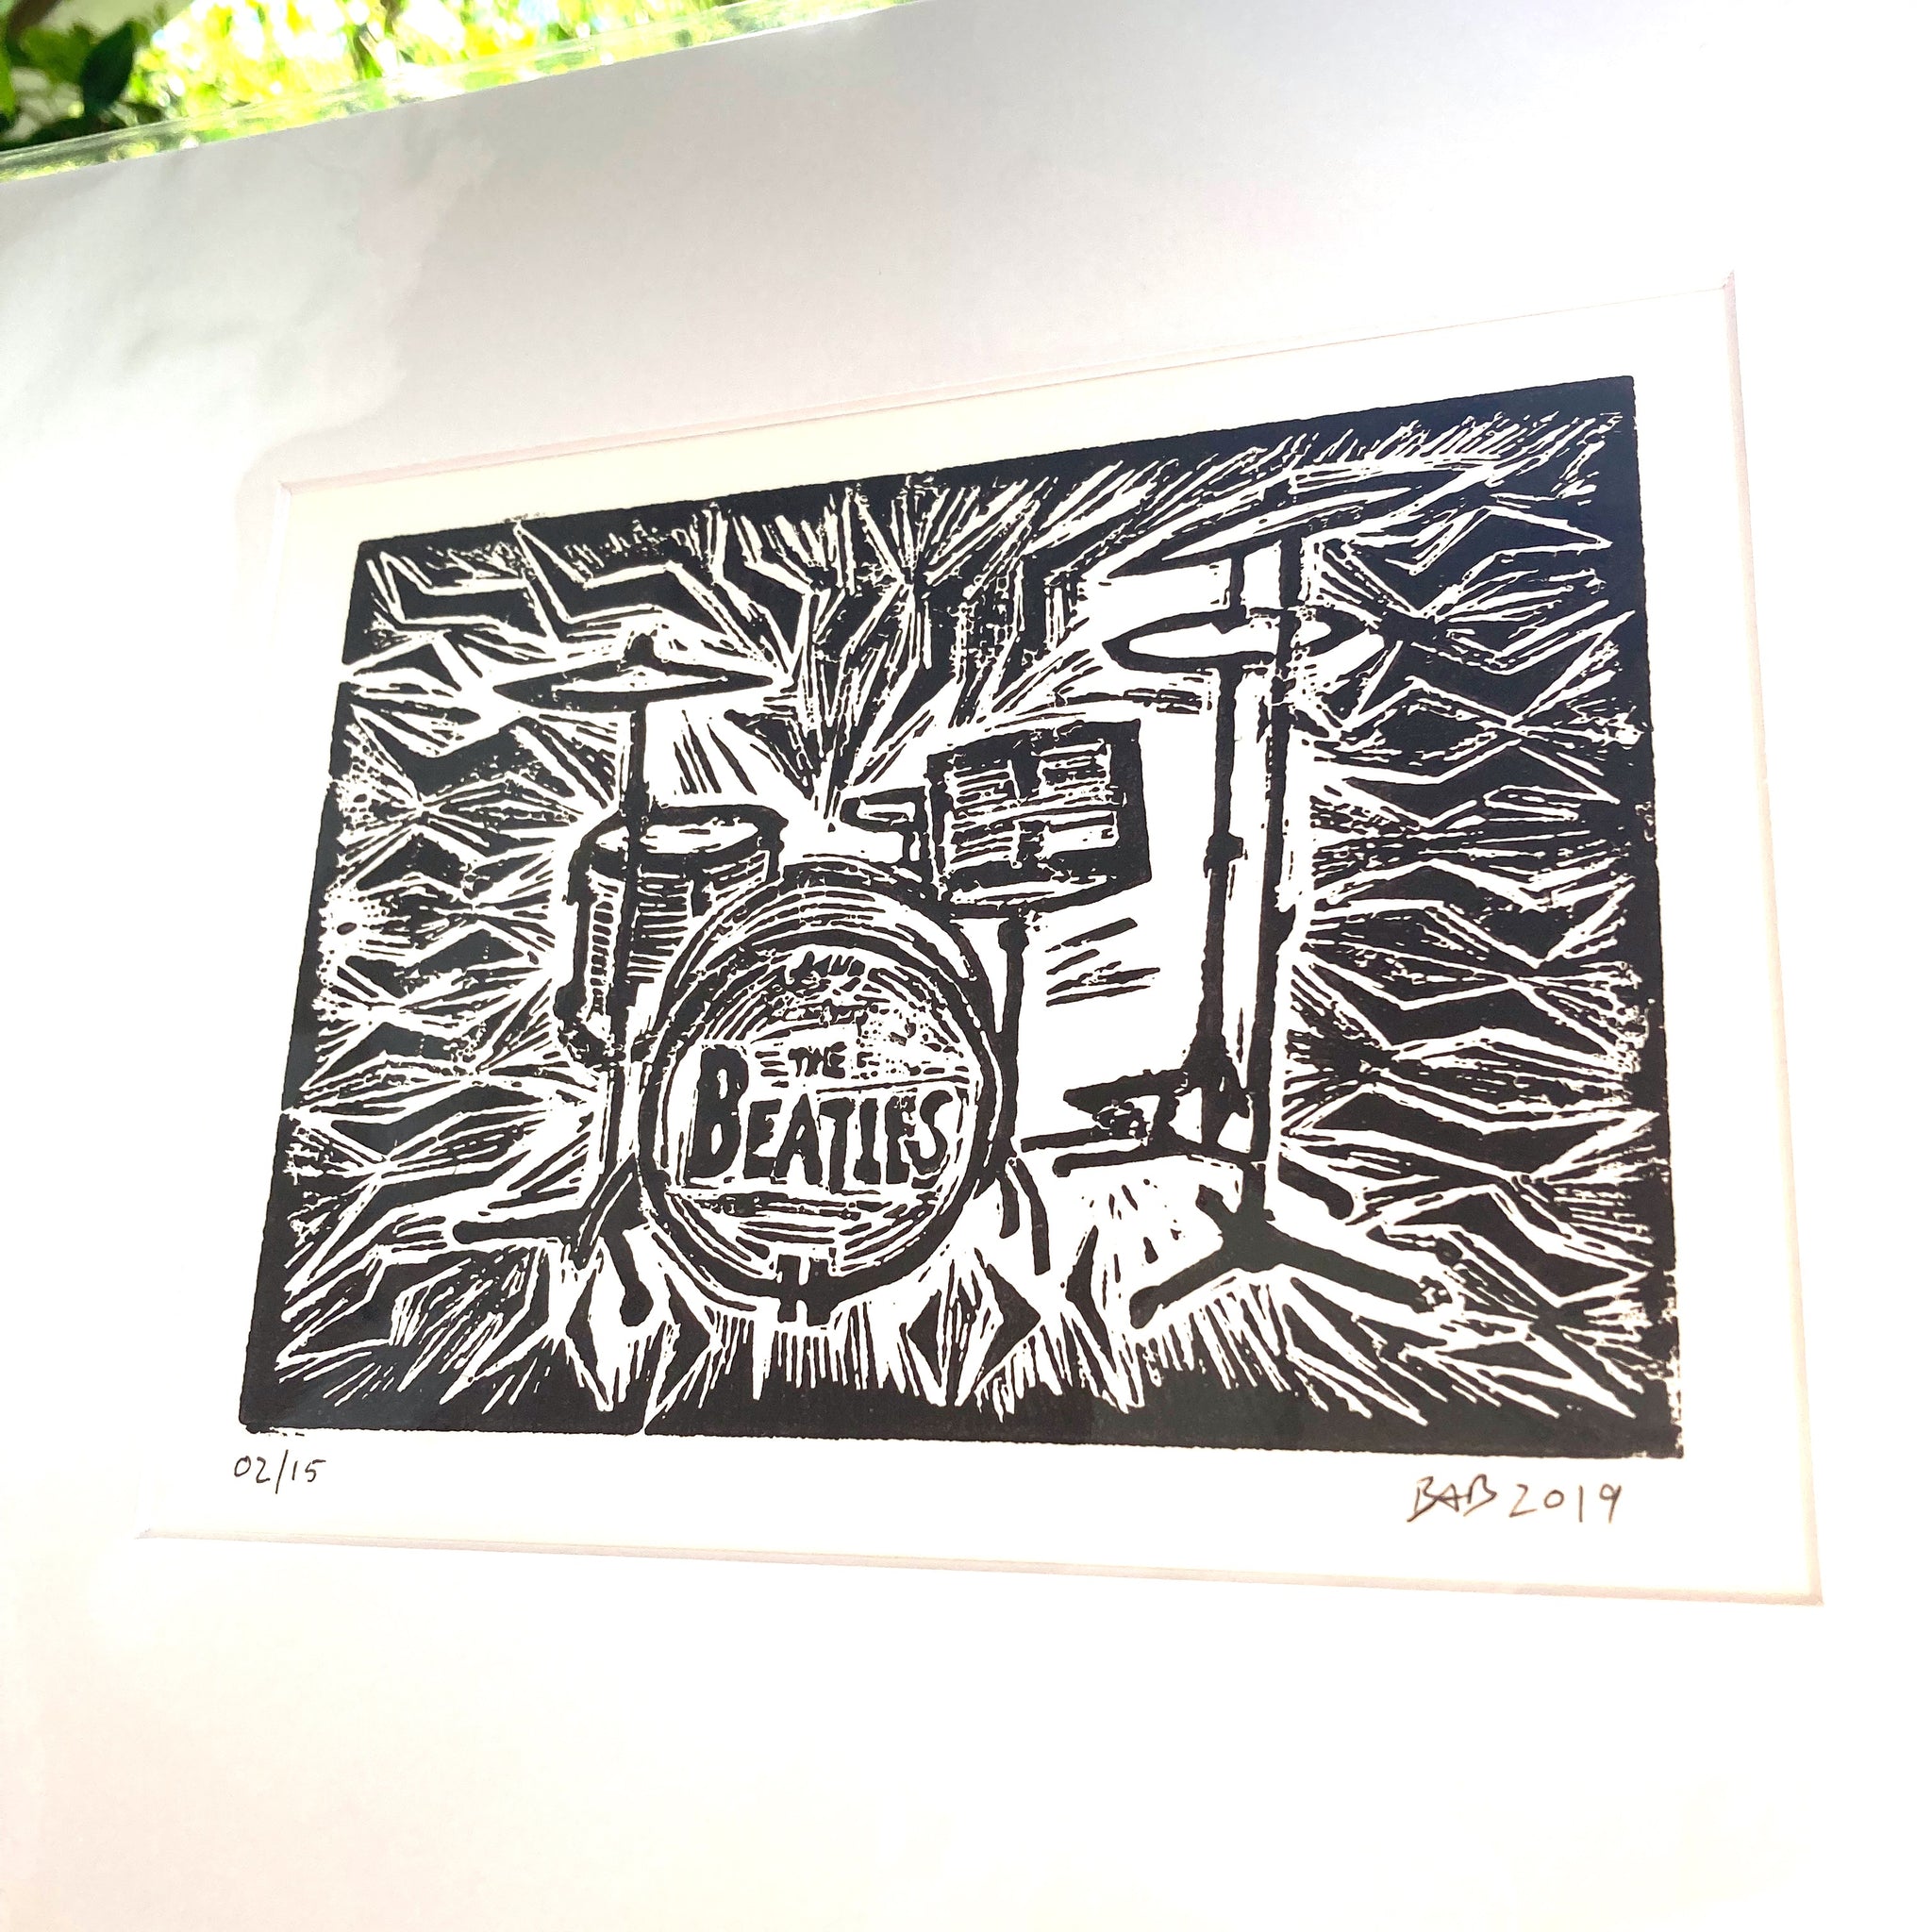 THE BEATLES DRUM KIT- An Original Limited Edition Linocut (Series of 1 –  Embrace The Weird